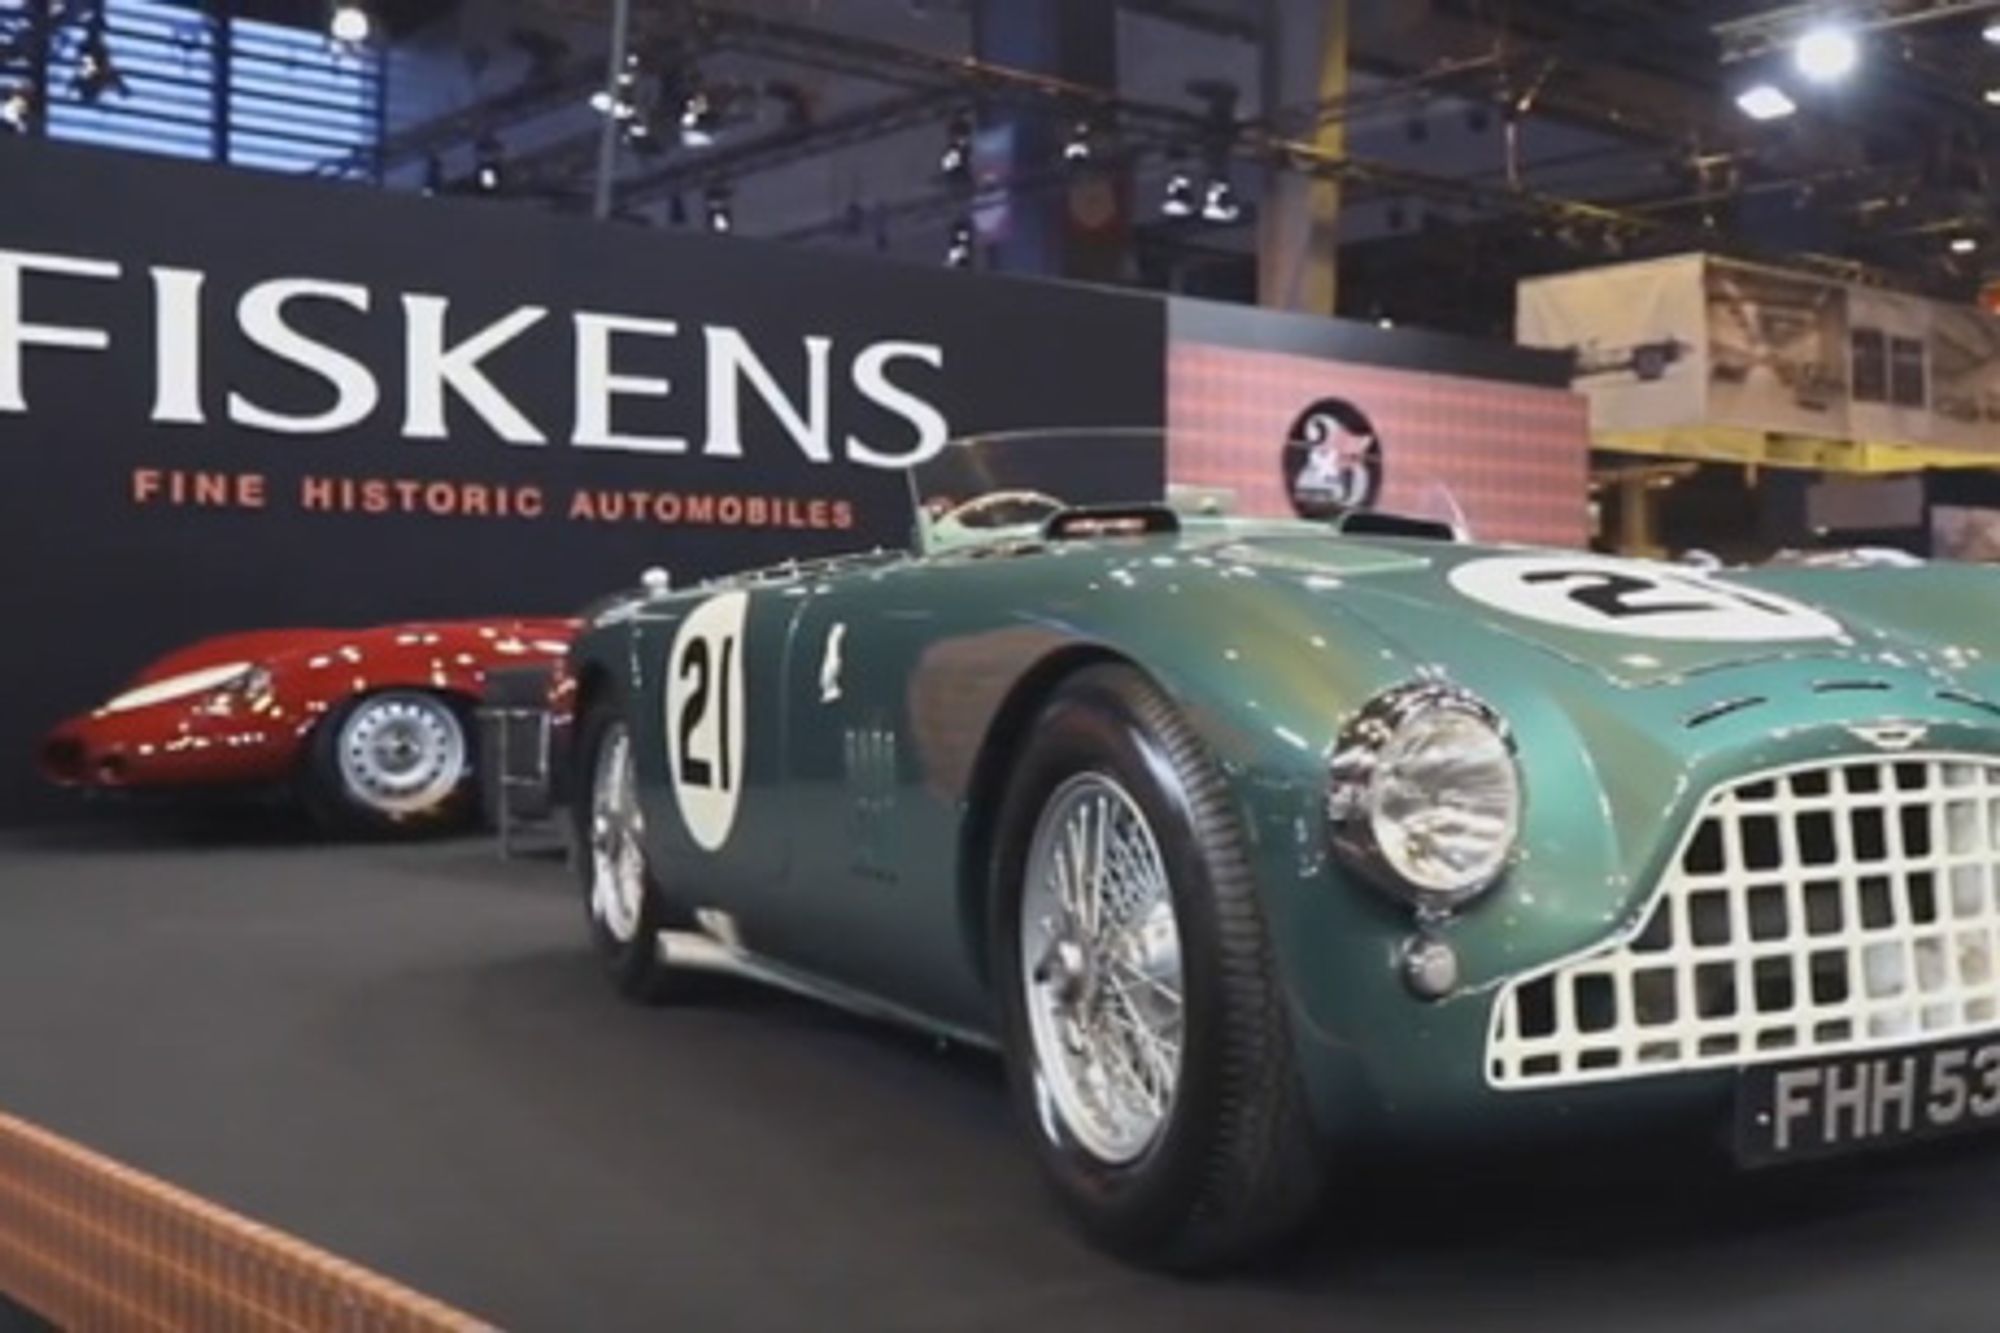 Fiskens returns from Salon Rétromobile after a strong and successful show